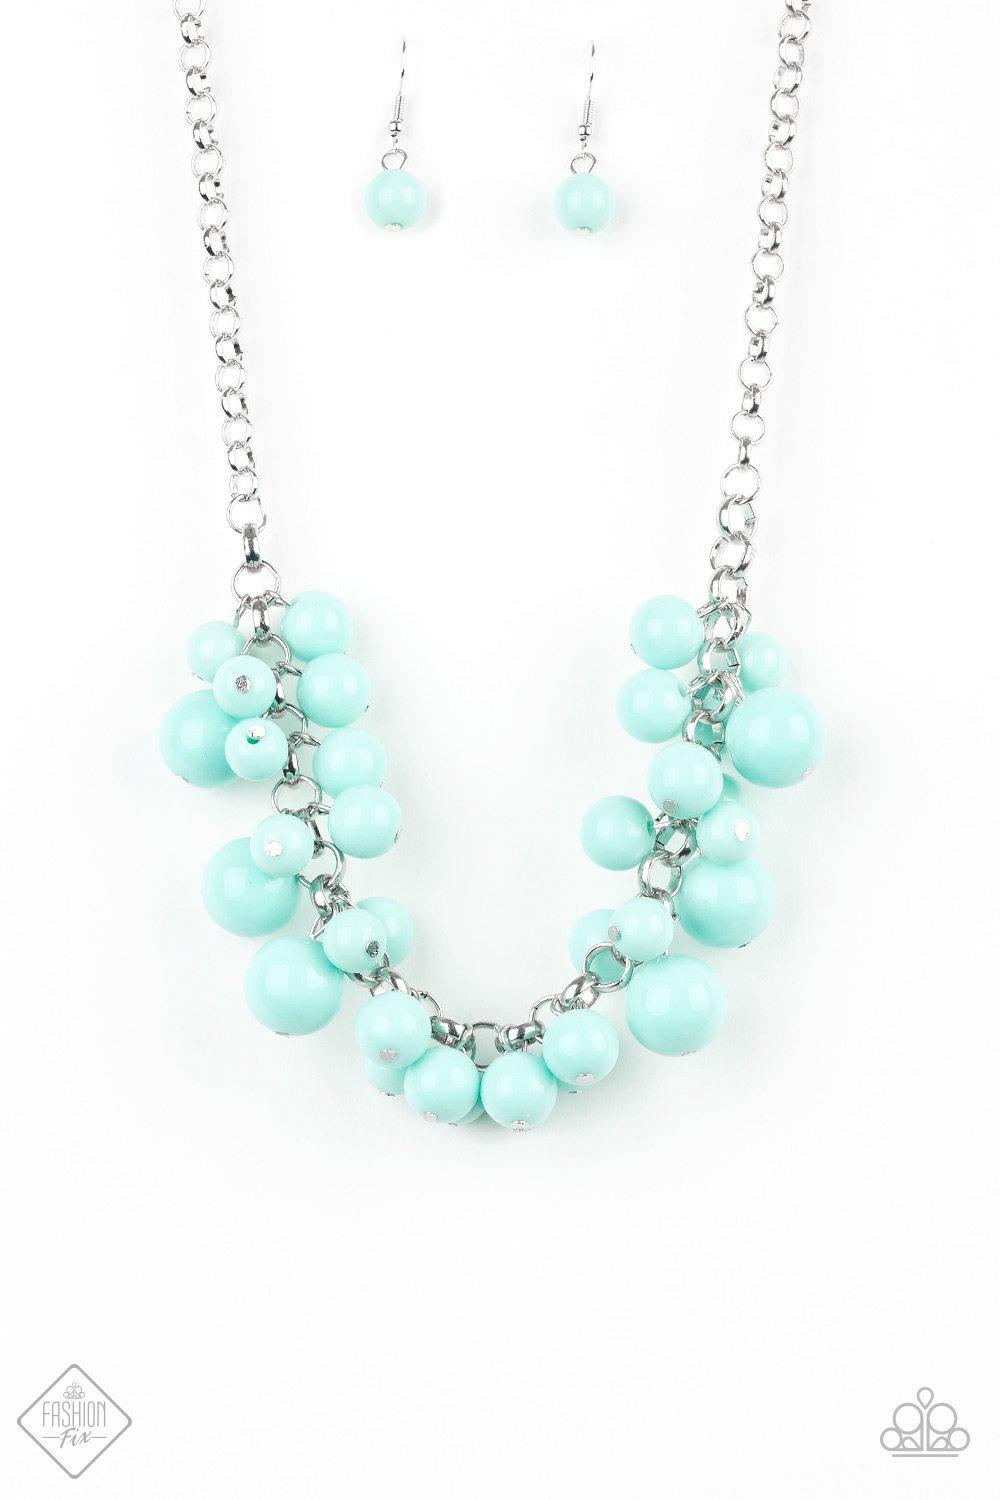 Walk this BROADWAY Pale Blue Necklace and matching Earrings - Paparazzi Accessories-CarasShop.com - $5 Jewelry by Cara Jewels